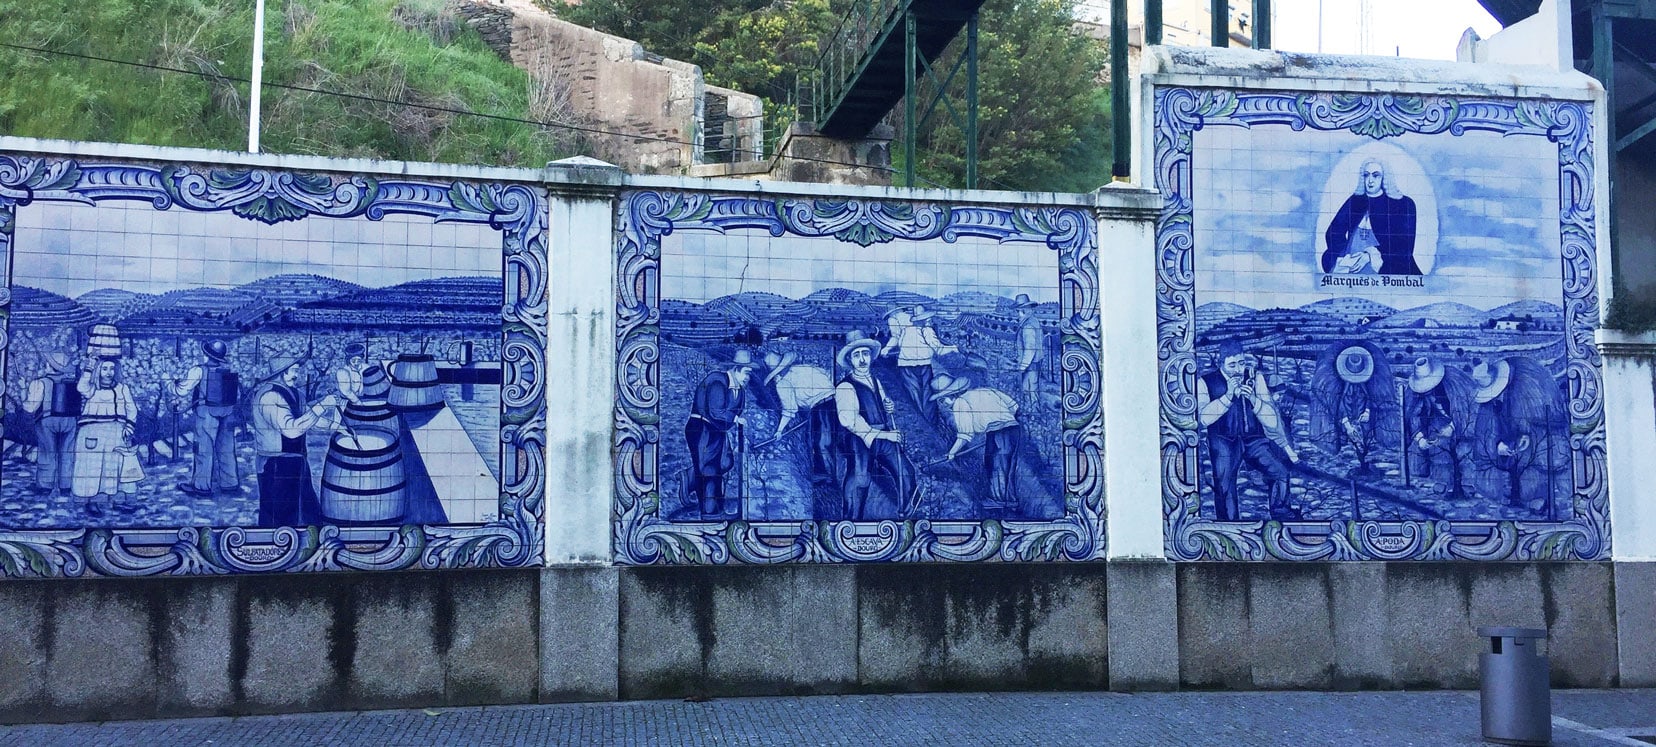 Azulejo tiles along the wall in on a street - the tiles are blue and white and depict images of local life